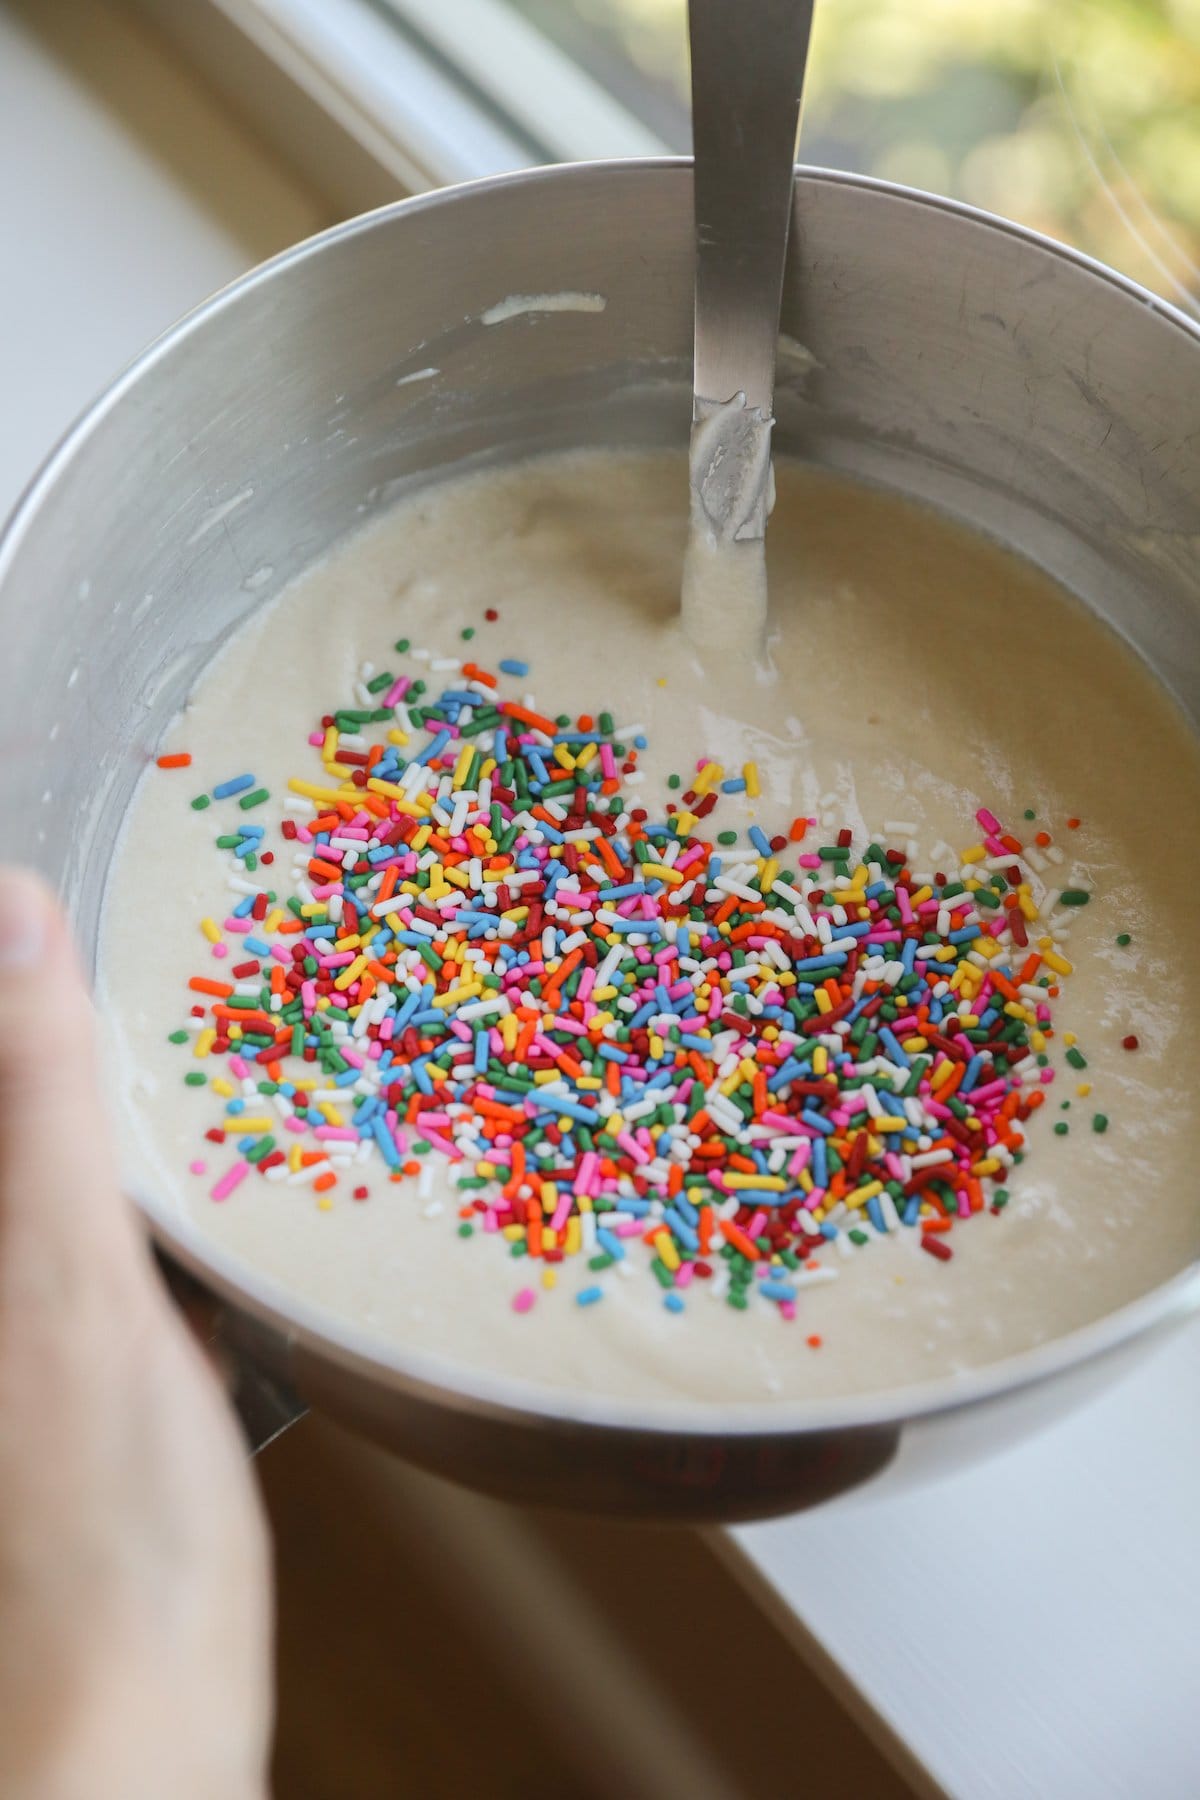 cake batter in bowl with sprinkles on top not folded in yet